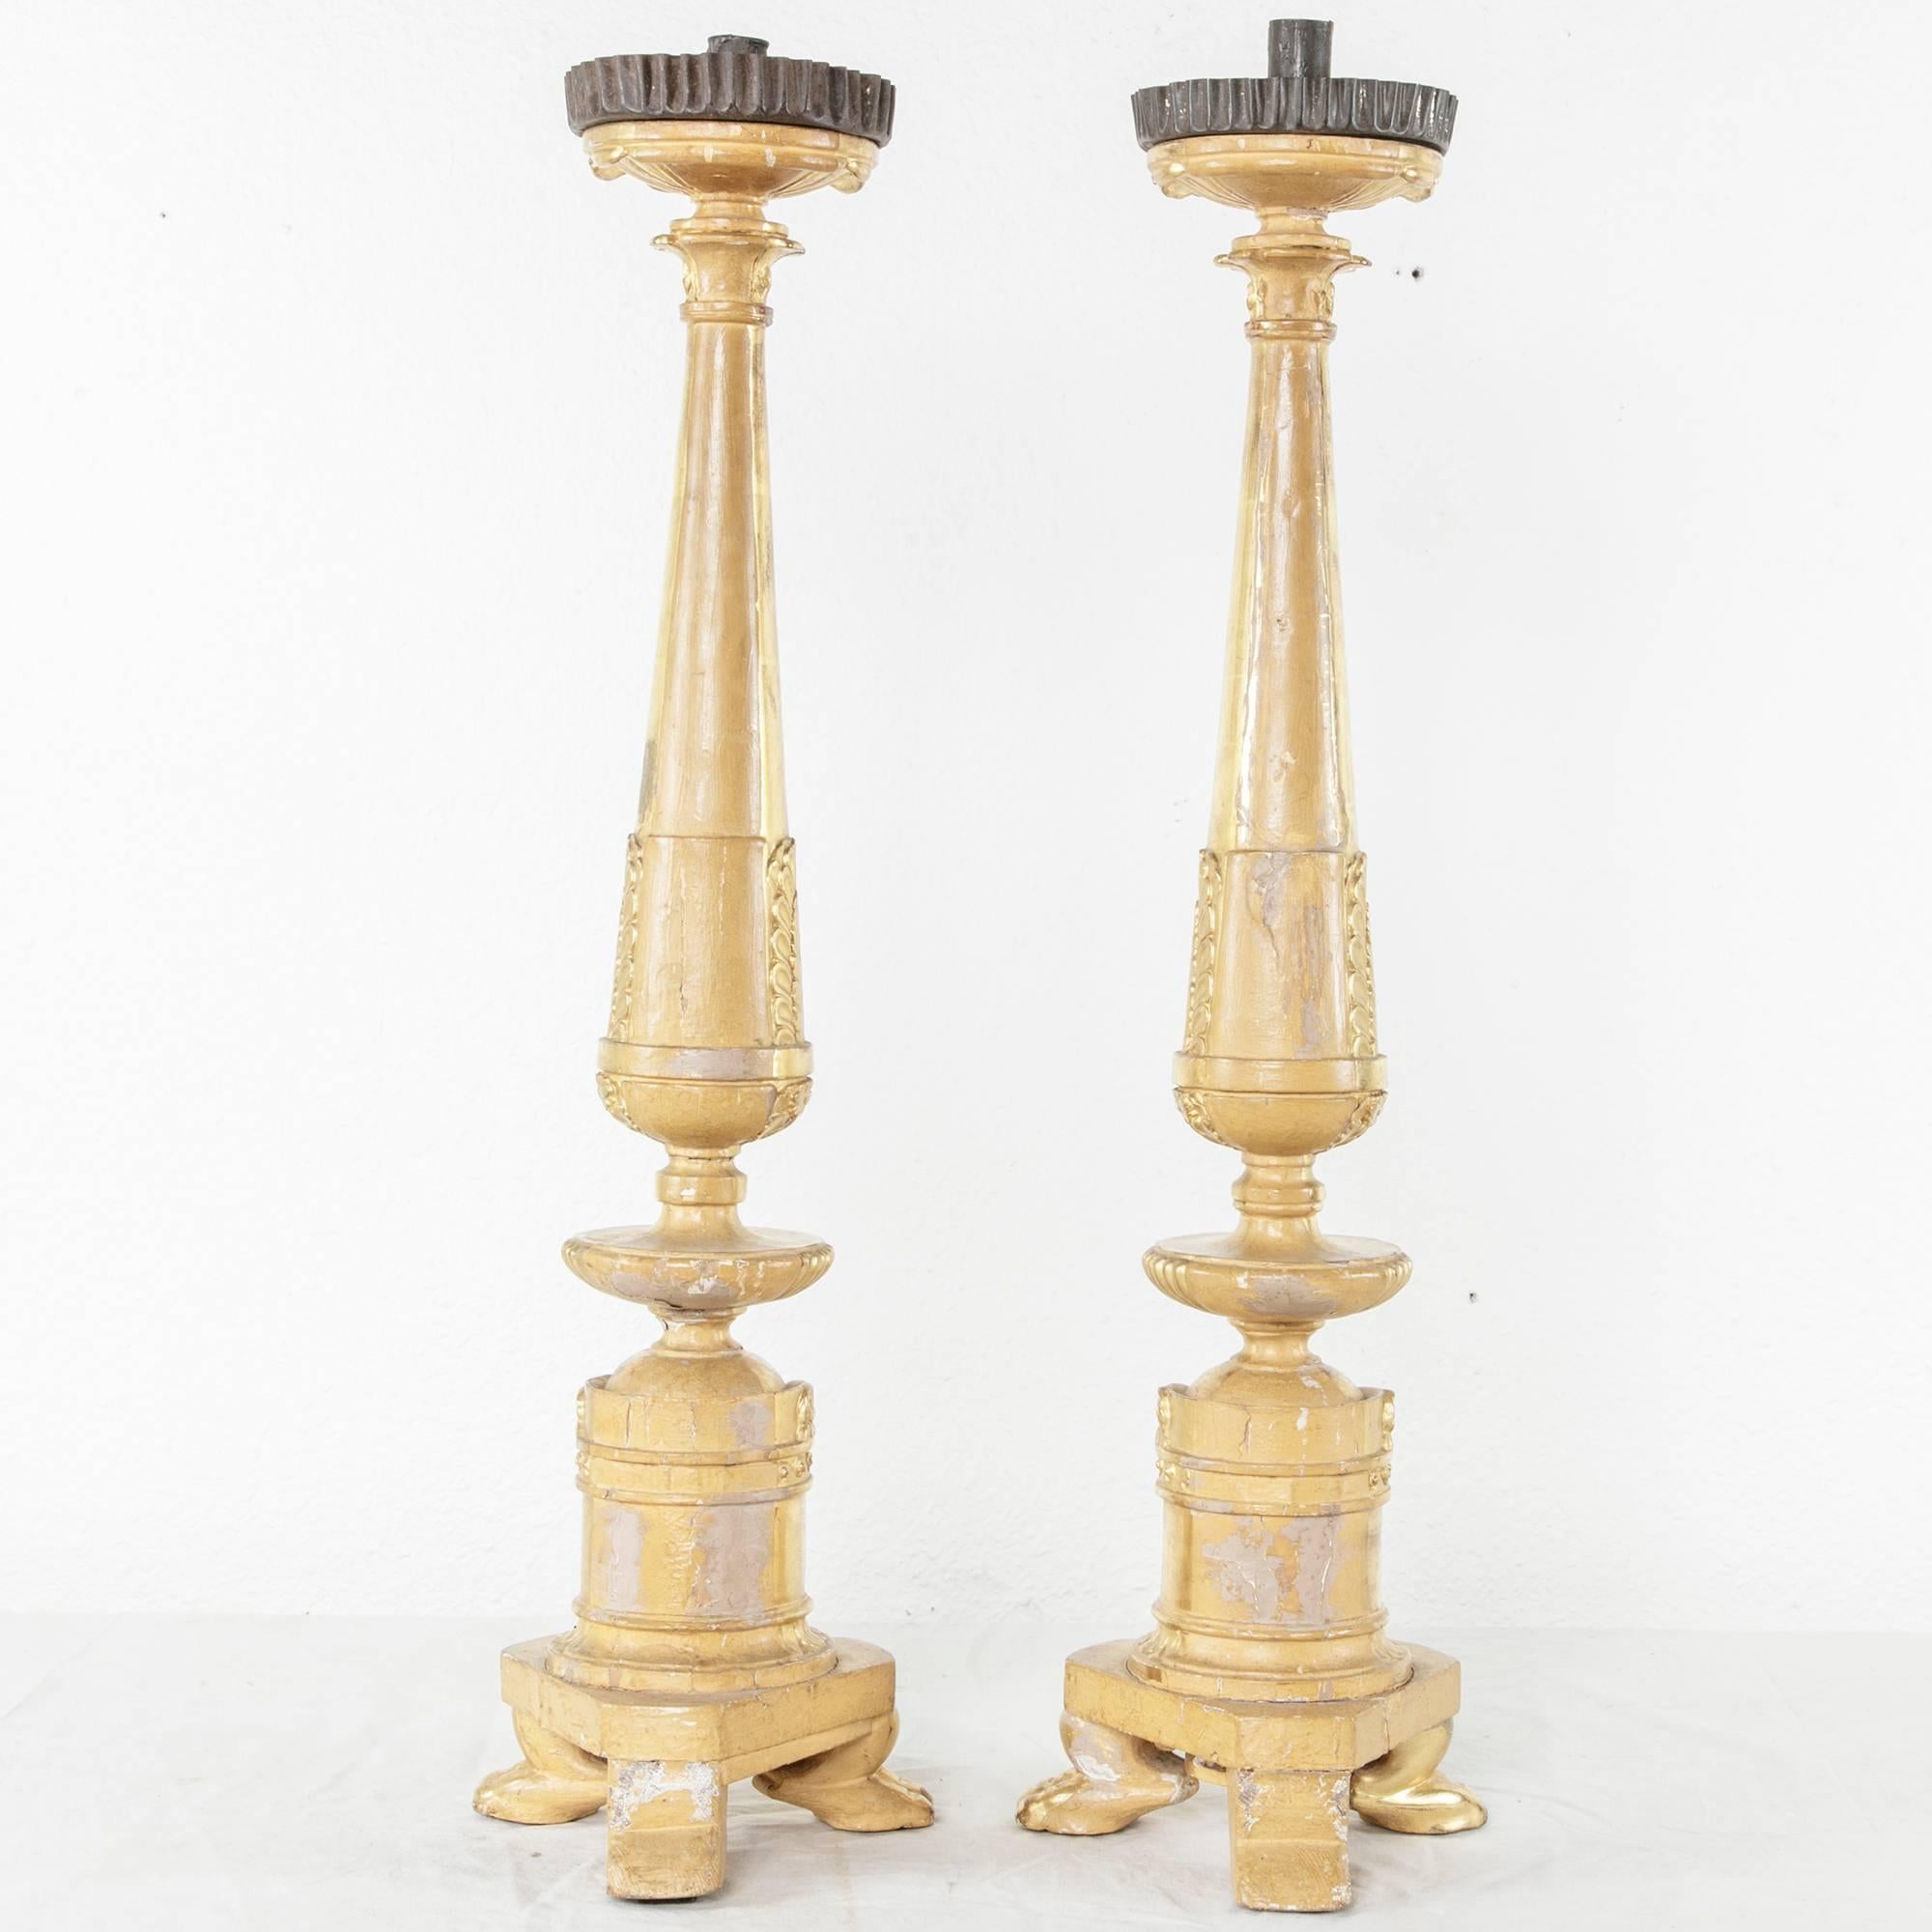 Early 19th Century French Empire Period Giltwood Candlesticks or Prickets For Sale 1